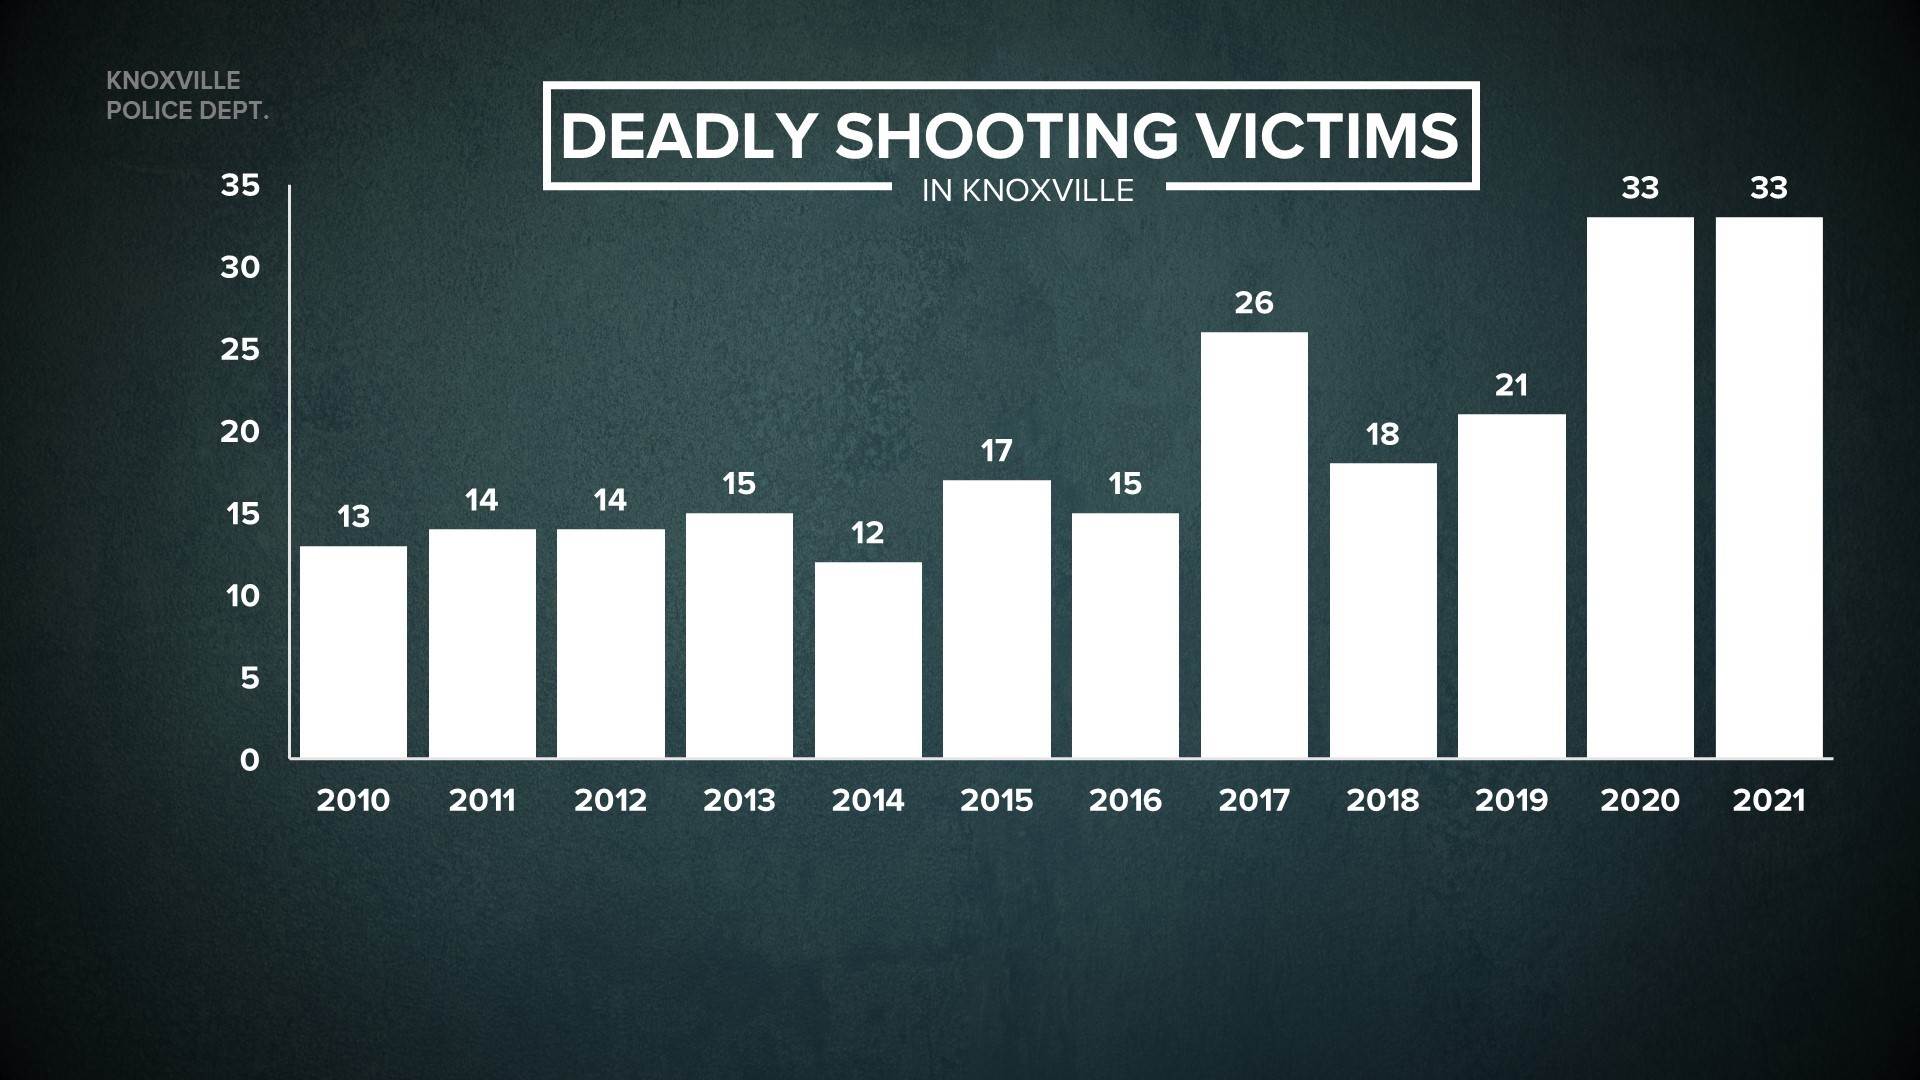 A total of 33 people have died to shootings, tying the record seen in 2020 with months still remaining in the year. Leaders are agonizing over the rash of violence.